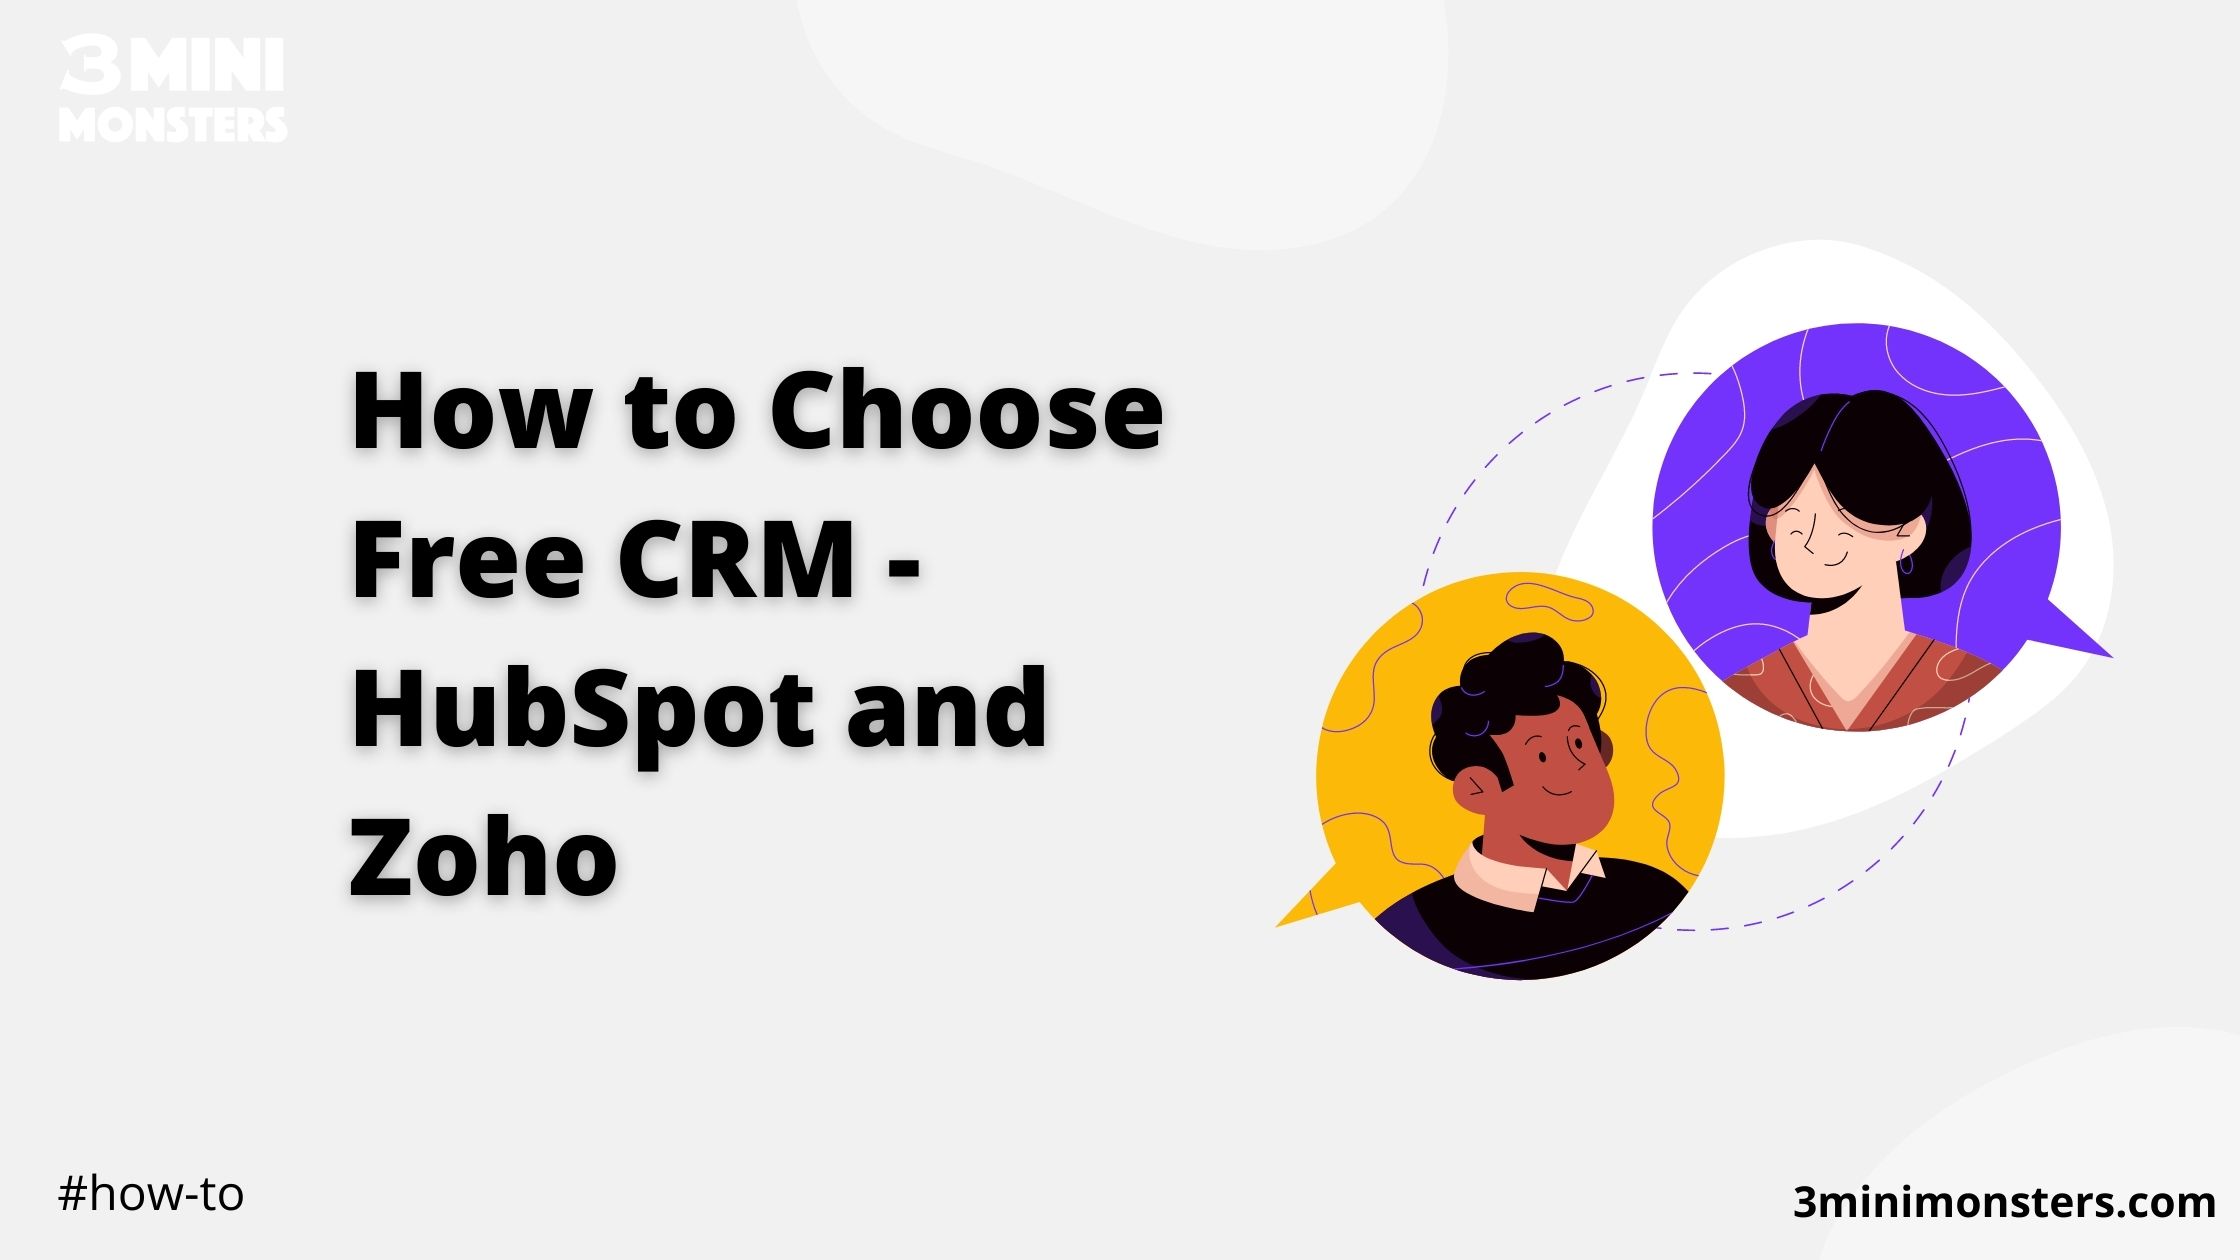 3minimonsters how to choose-free crm hubspot and zoho